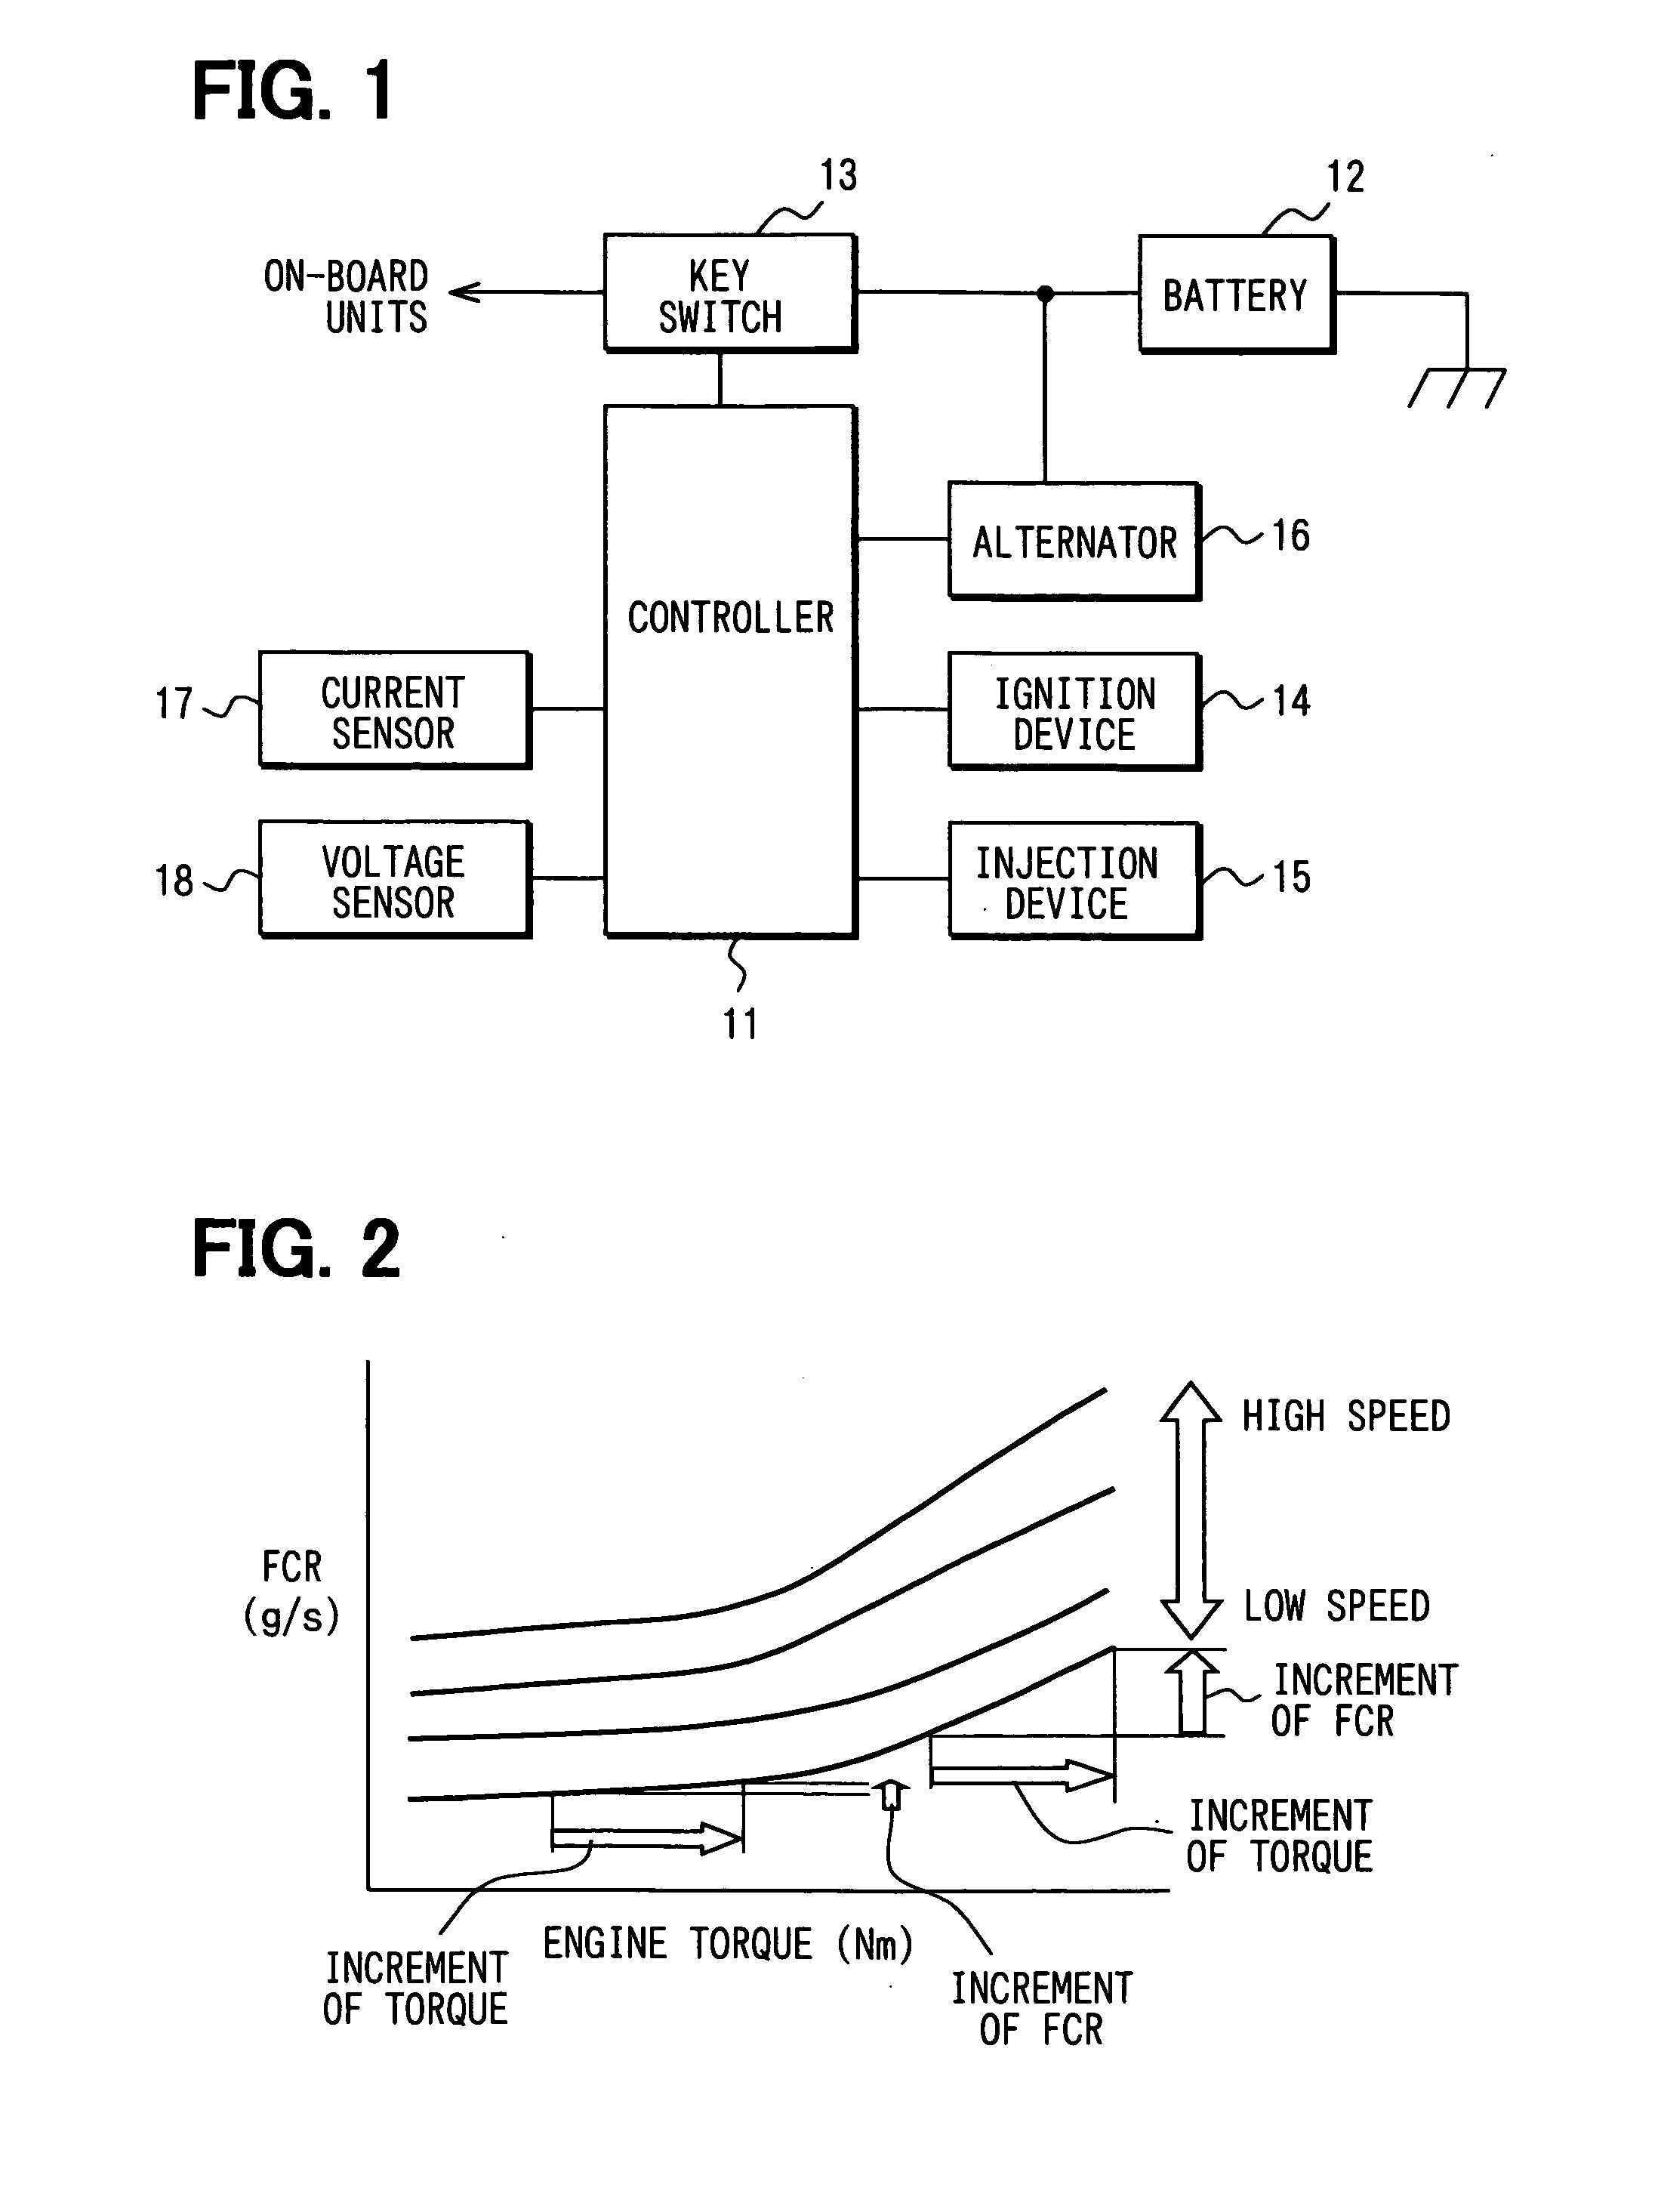 Power generation control apparatus for internal combustion engine